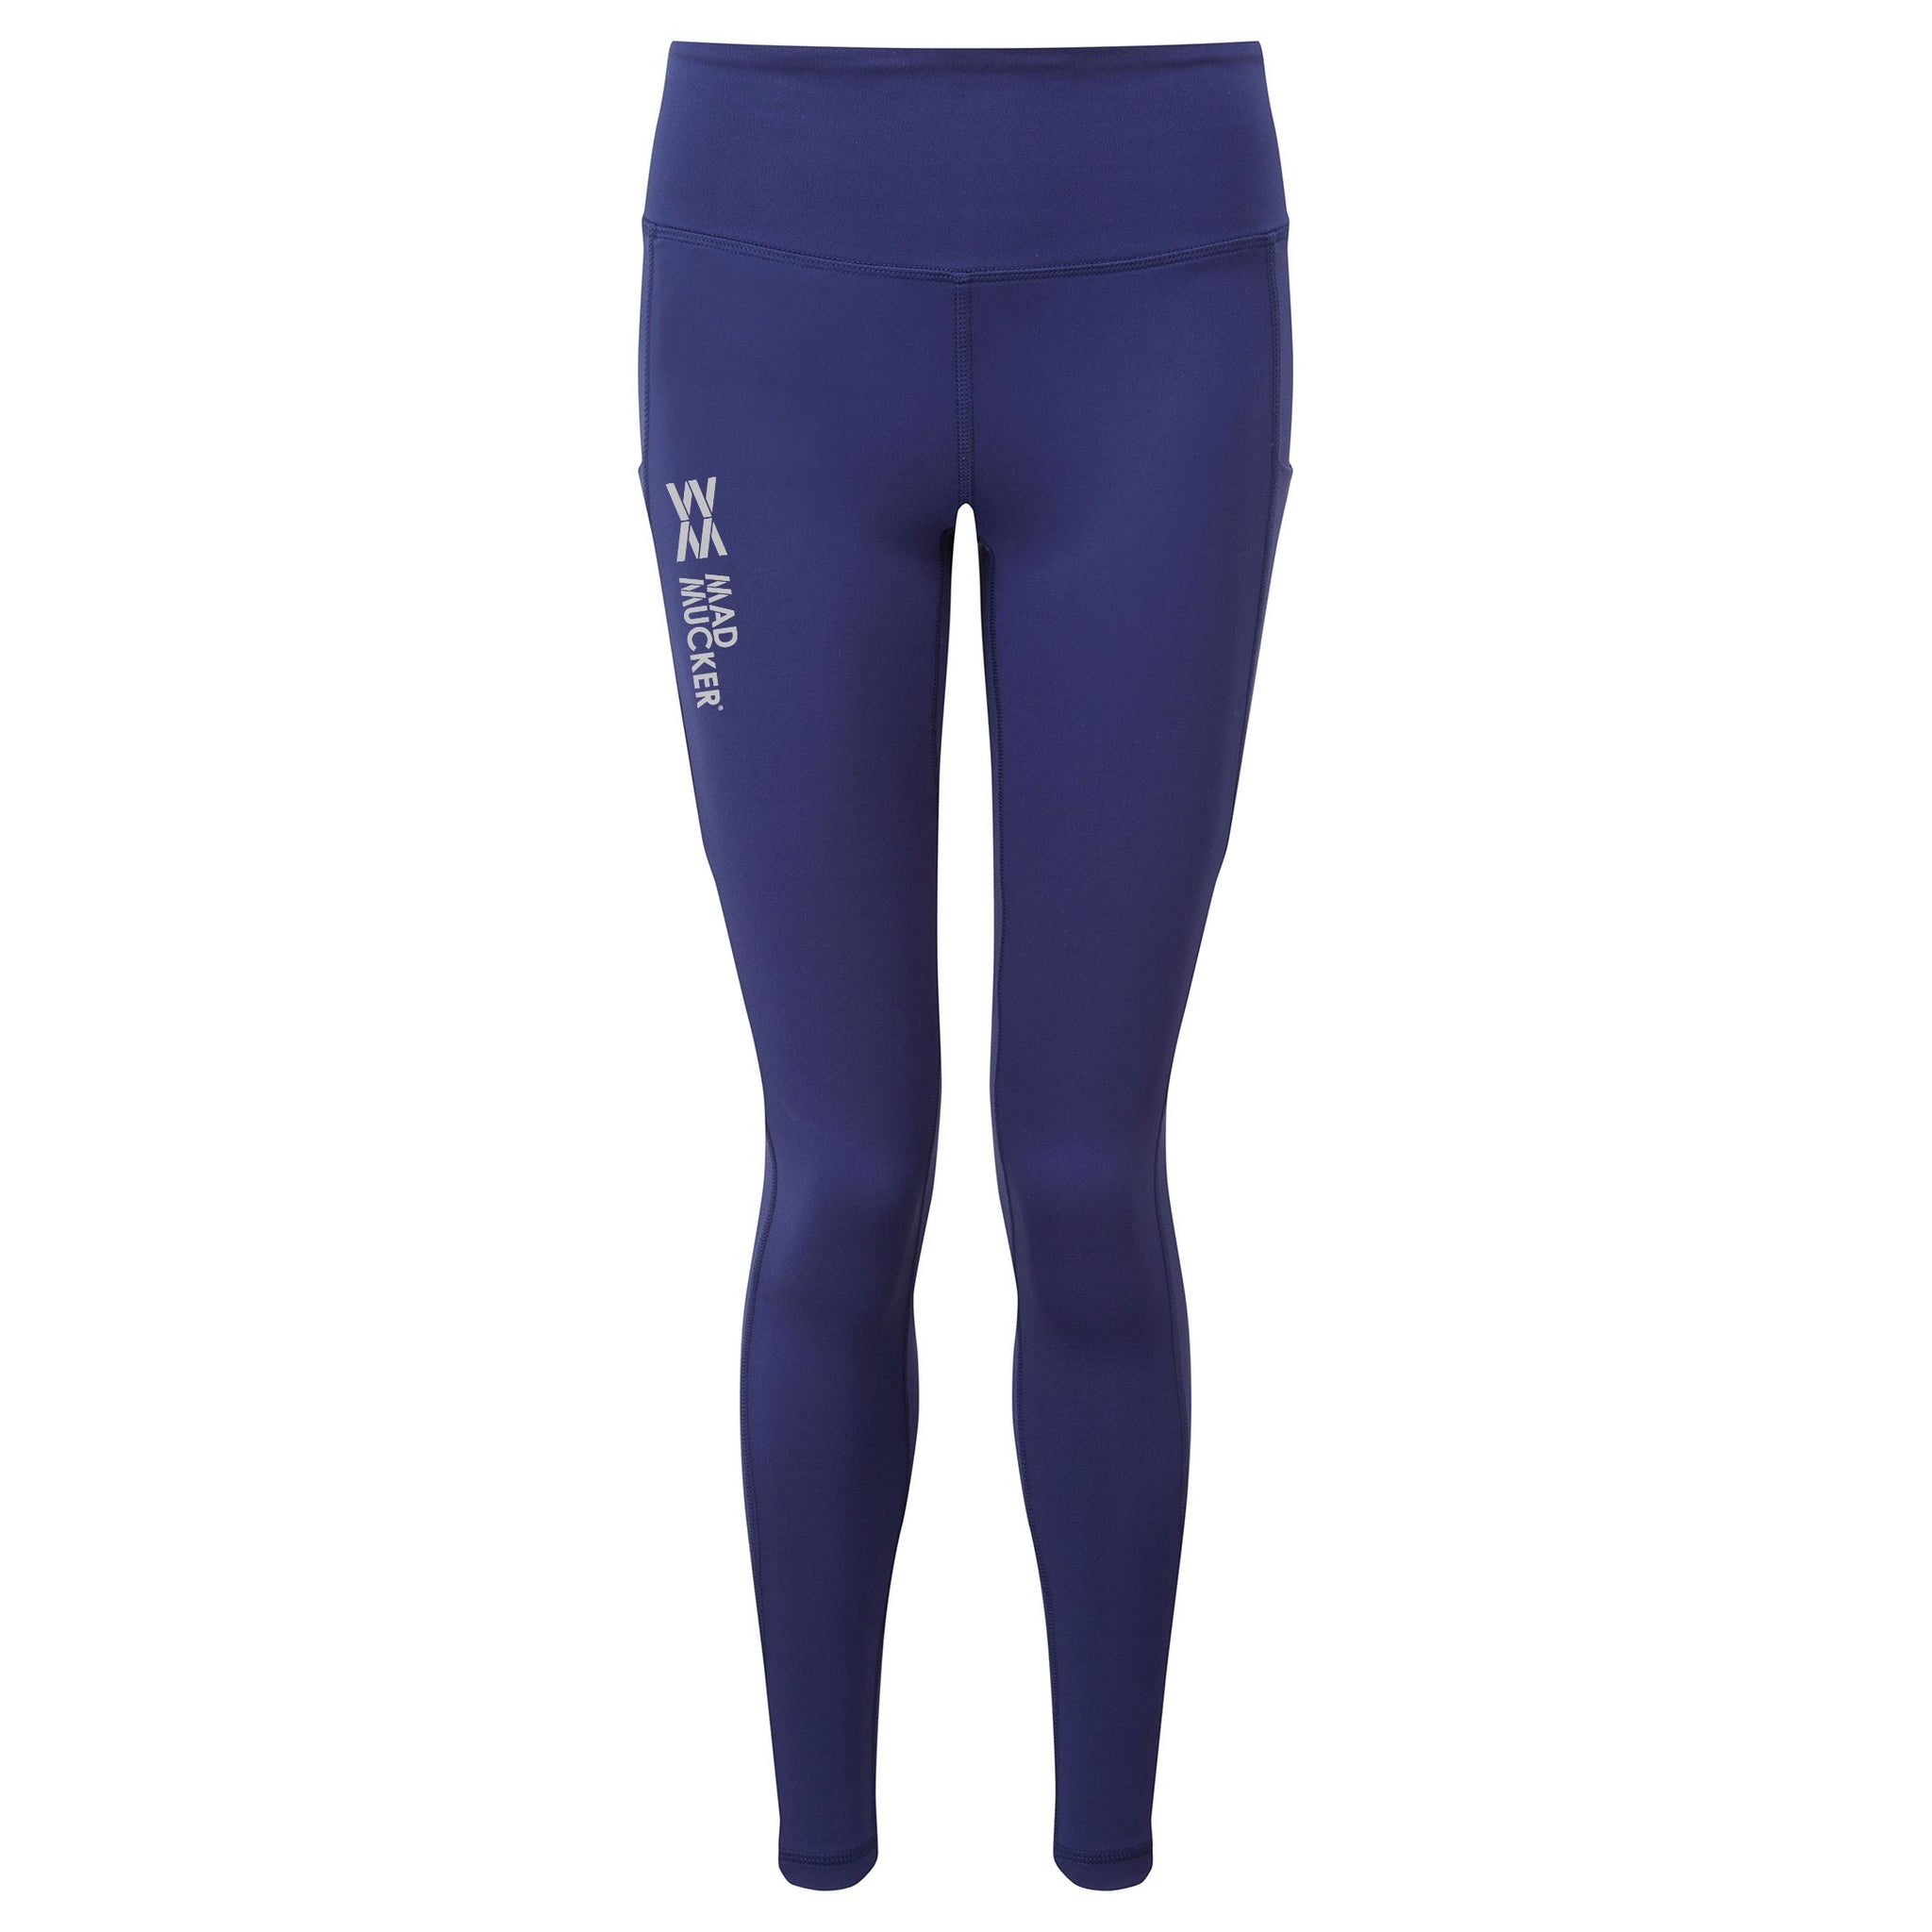 Buy Maskerade Women's Activewear Leggings for Yoga, Cycling & Workout, Navy  (30) at